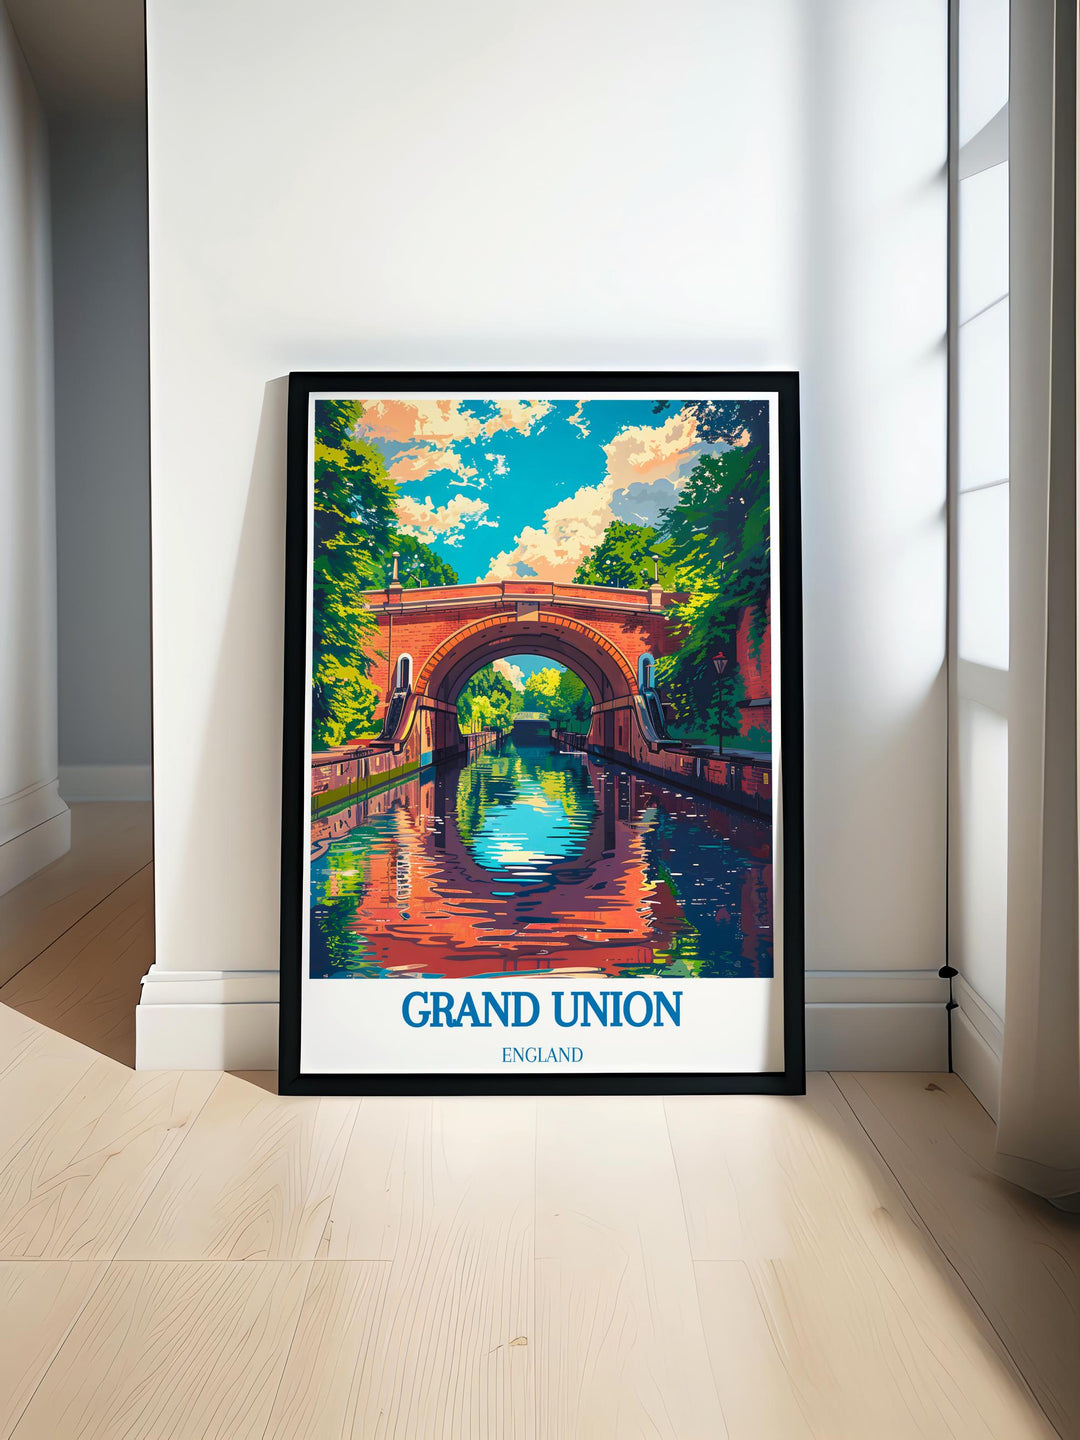 Detailed depiction of narrowboats on the tranquil waters of Grand Union Canal surrounded by lush greenery and vibrant wildlife, perfect for canal and boating enthusiasts.